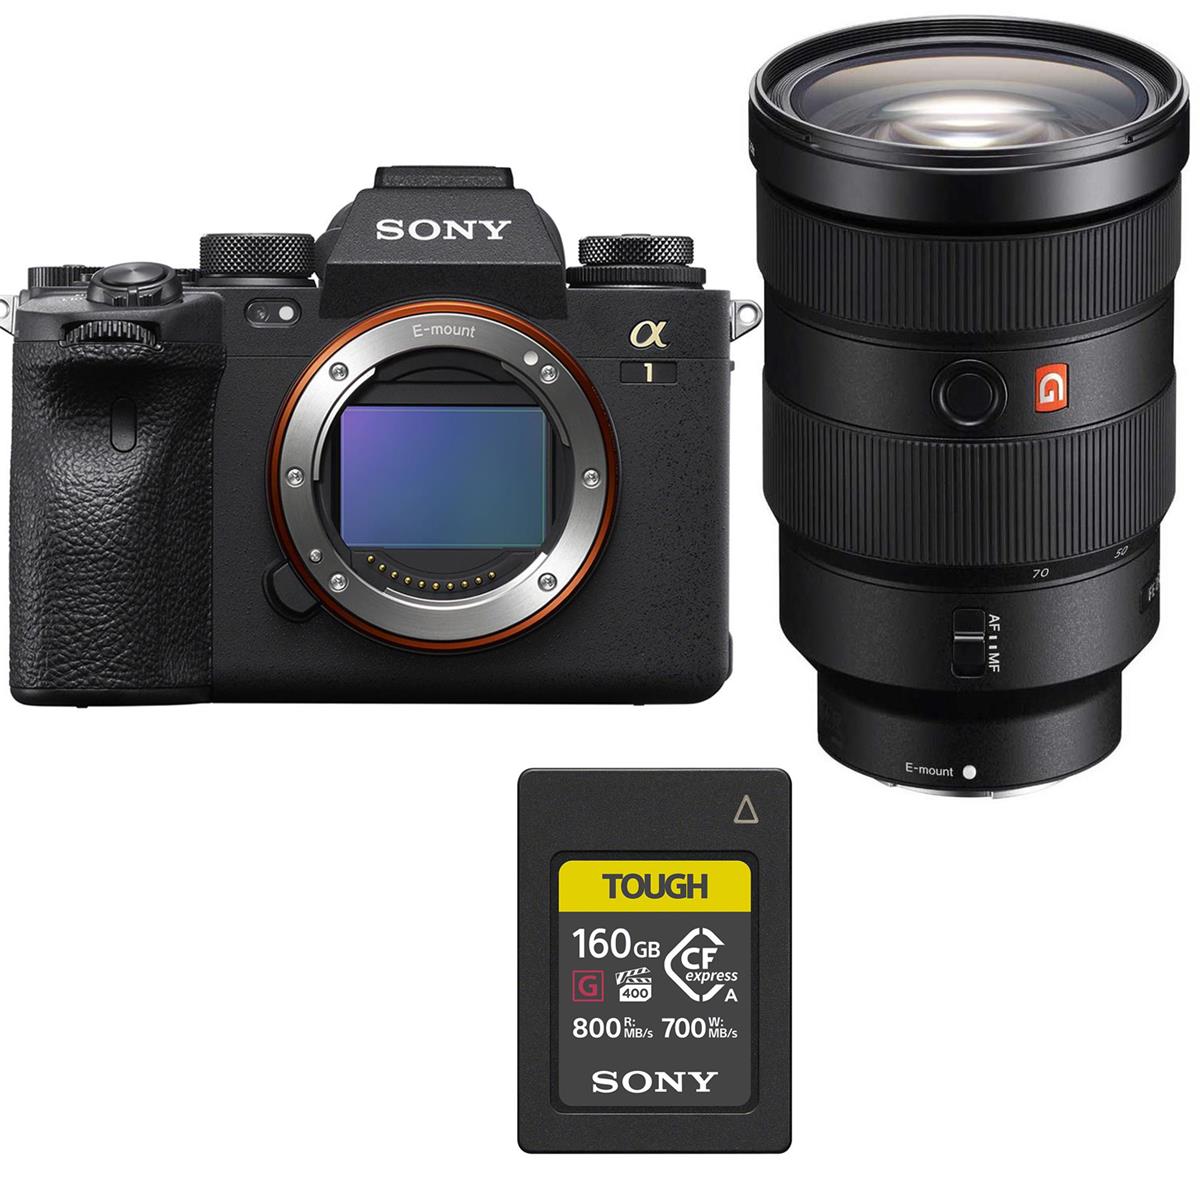 Sony Alpha 1 Mirrorless Camera with FE 24-70mm f/2.8 GM Lens with 160GB CF Card